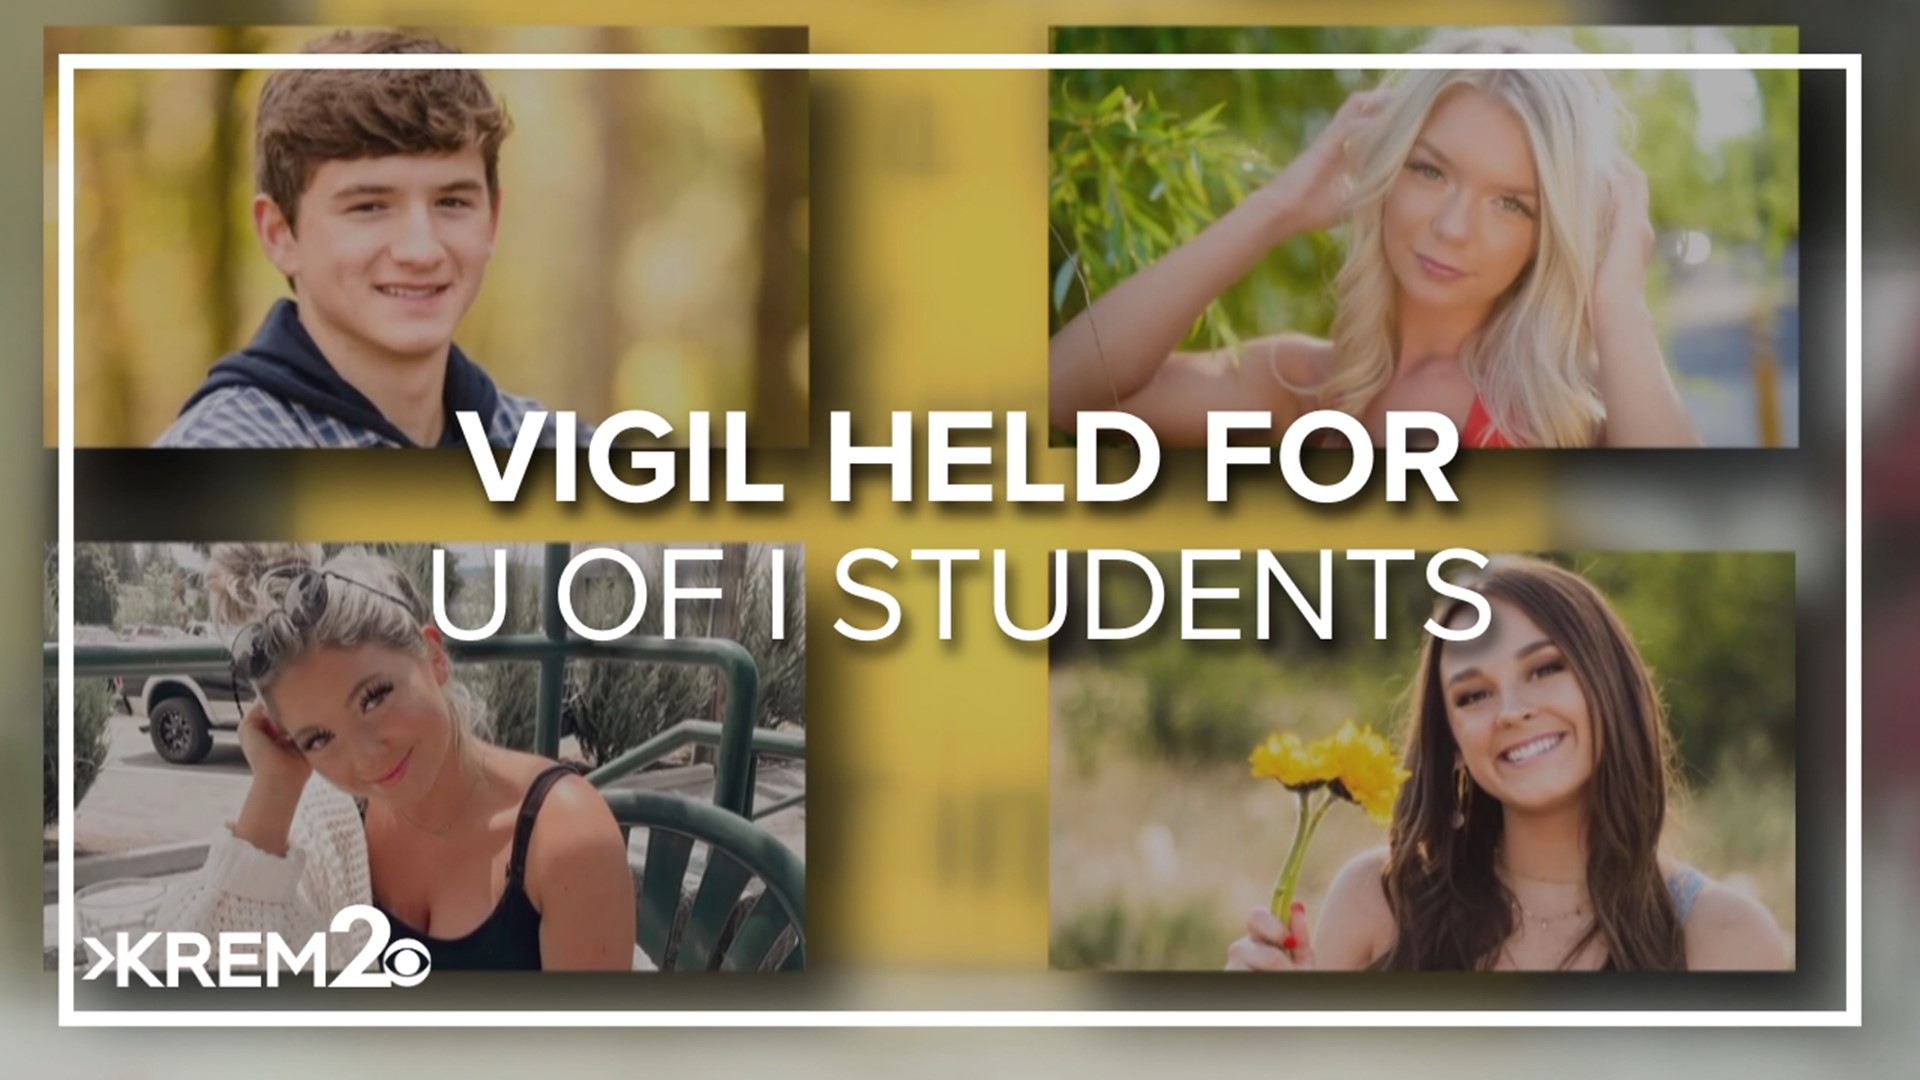 During the vigil four students will speak in memory of Ethan Chapin, Xana Kernodle, Madison Mogen and Kaylee Goncalves.